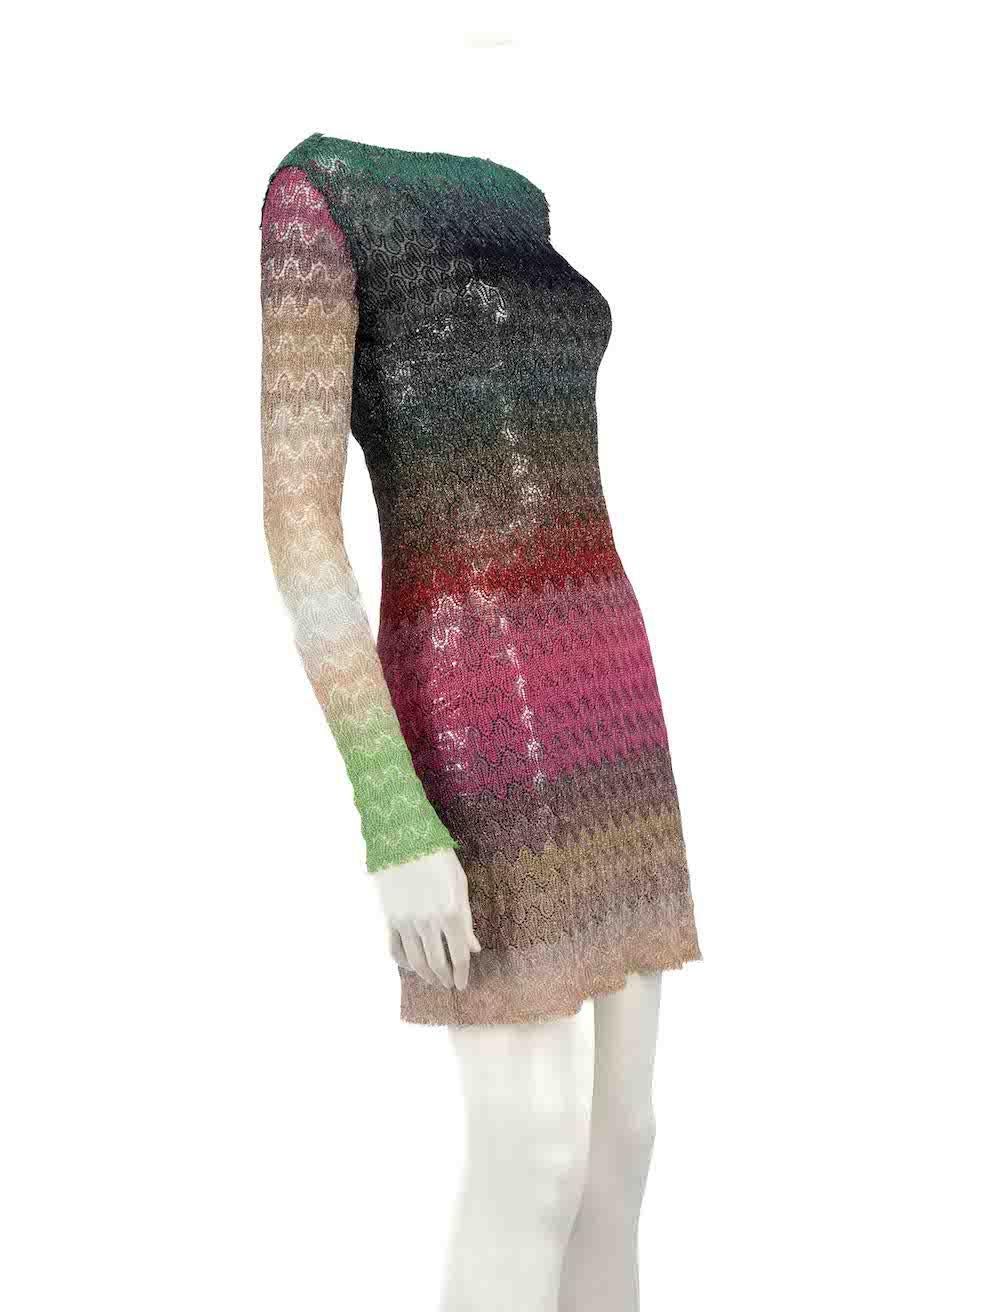 CONDITION is Very good. Minimal wear to dress is evident. Minimal wear to the cuffs and hems with some very light fraying of the knit seen on this used Missoni designer resale item.
 
 
 
 Details
 
 
 Multicolour
 
 Viscose
 
 Knit dress
 
 Long